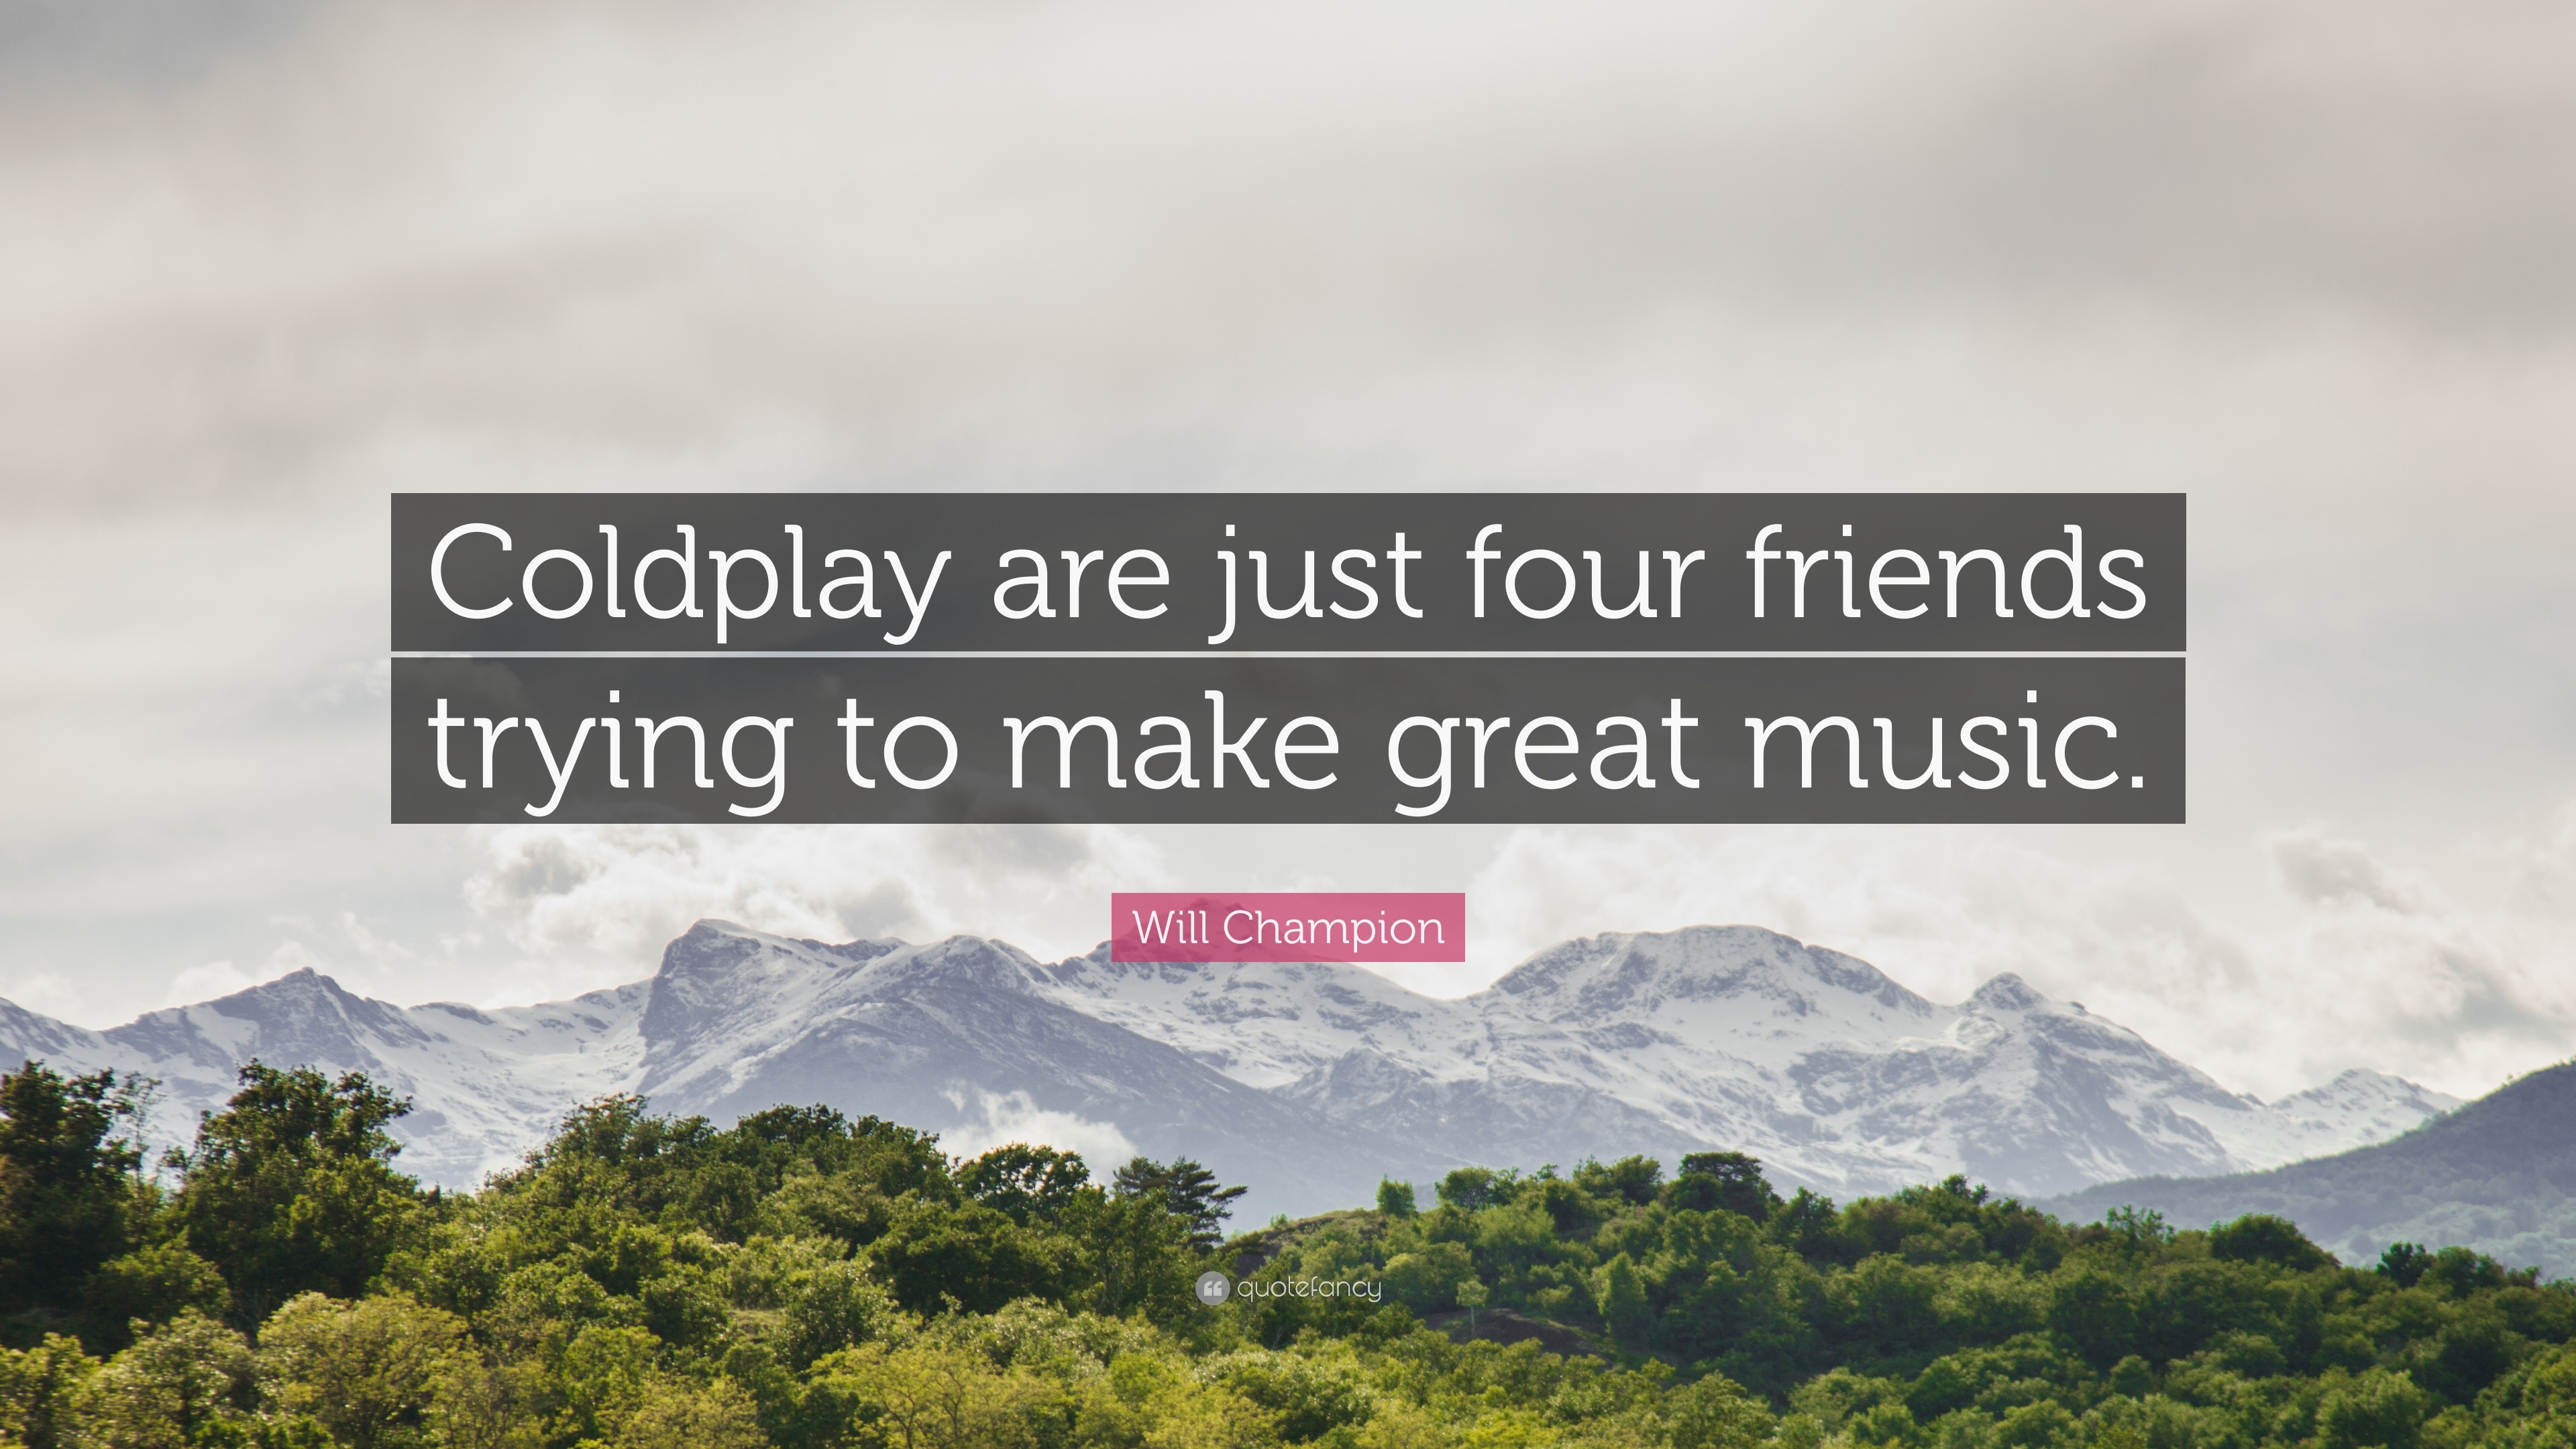 Will Champion Quote: “Coldplay are just four friends trying to make great  music.”